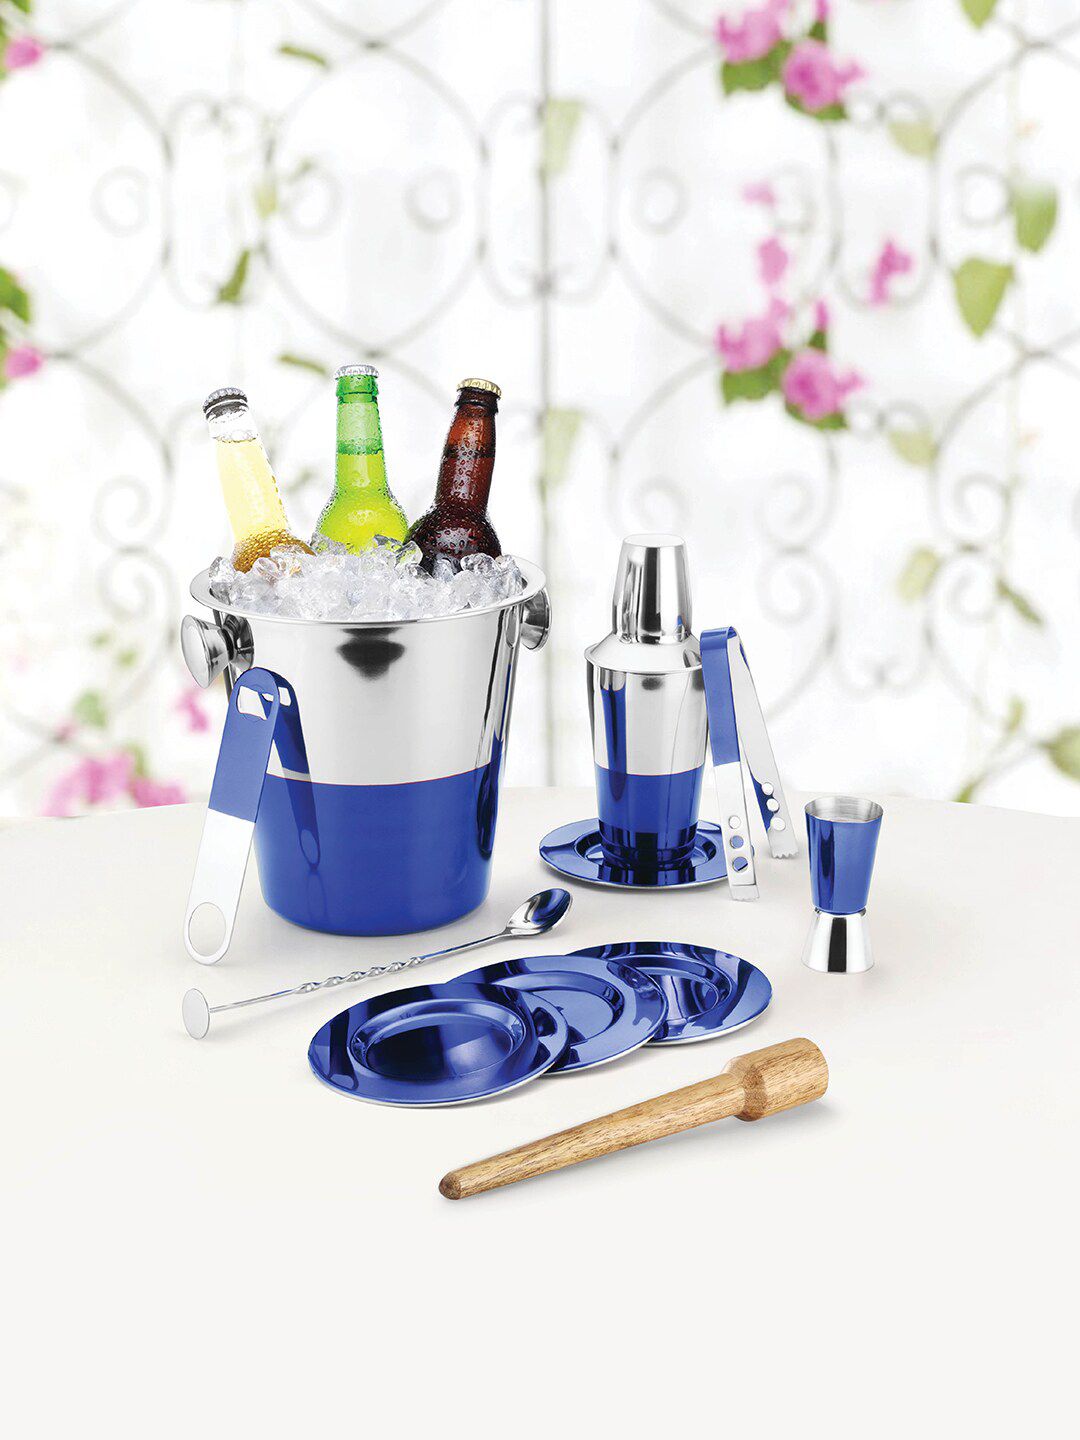 URBAN CHEF Bartender Blue Lacquered Kit Stainless Steel 11 Pieces Bar Set Price in India